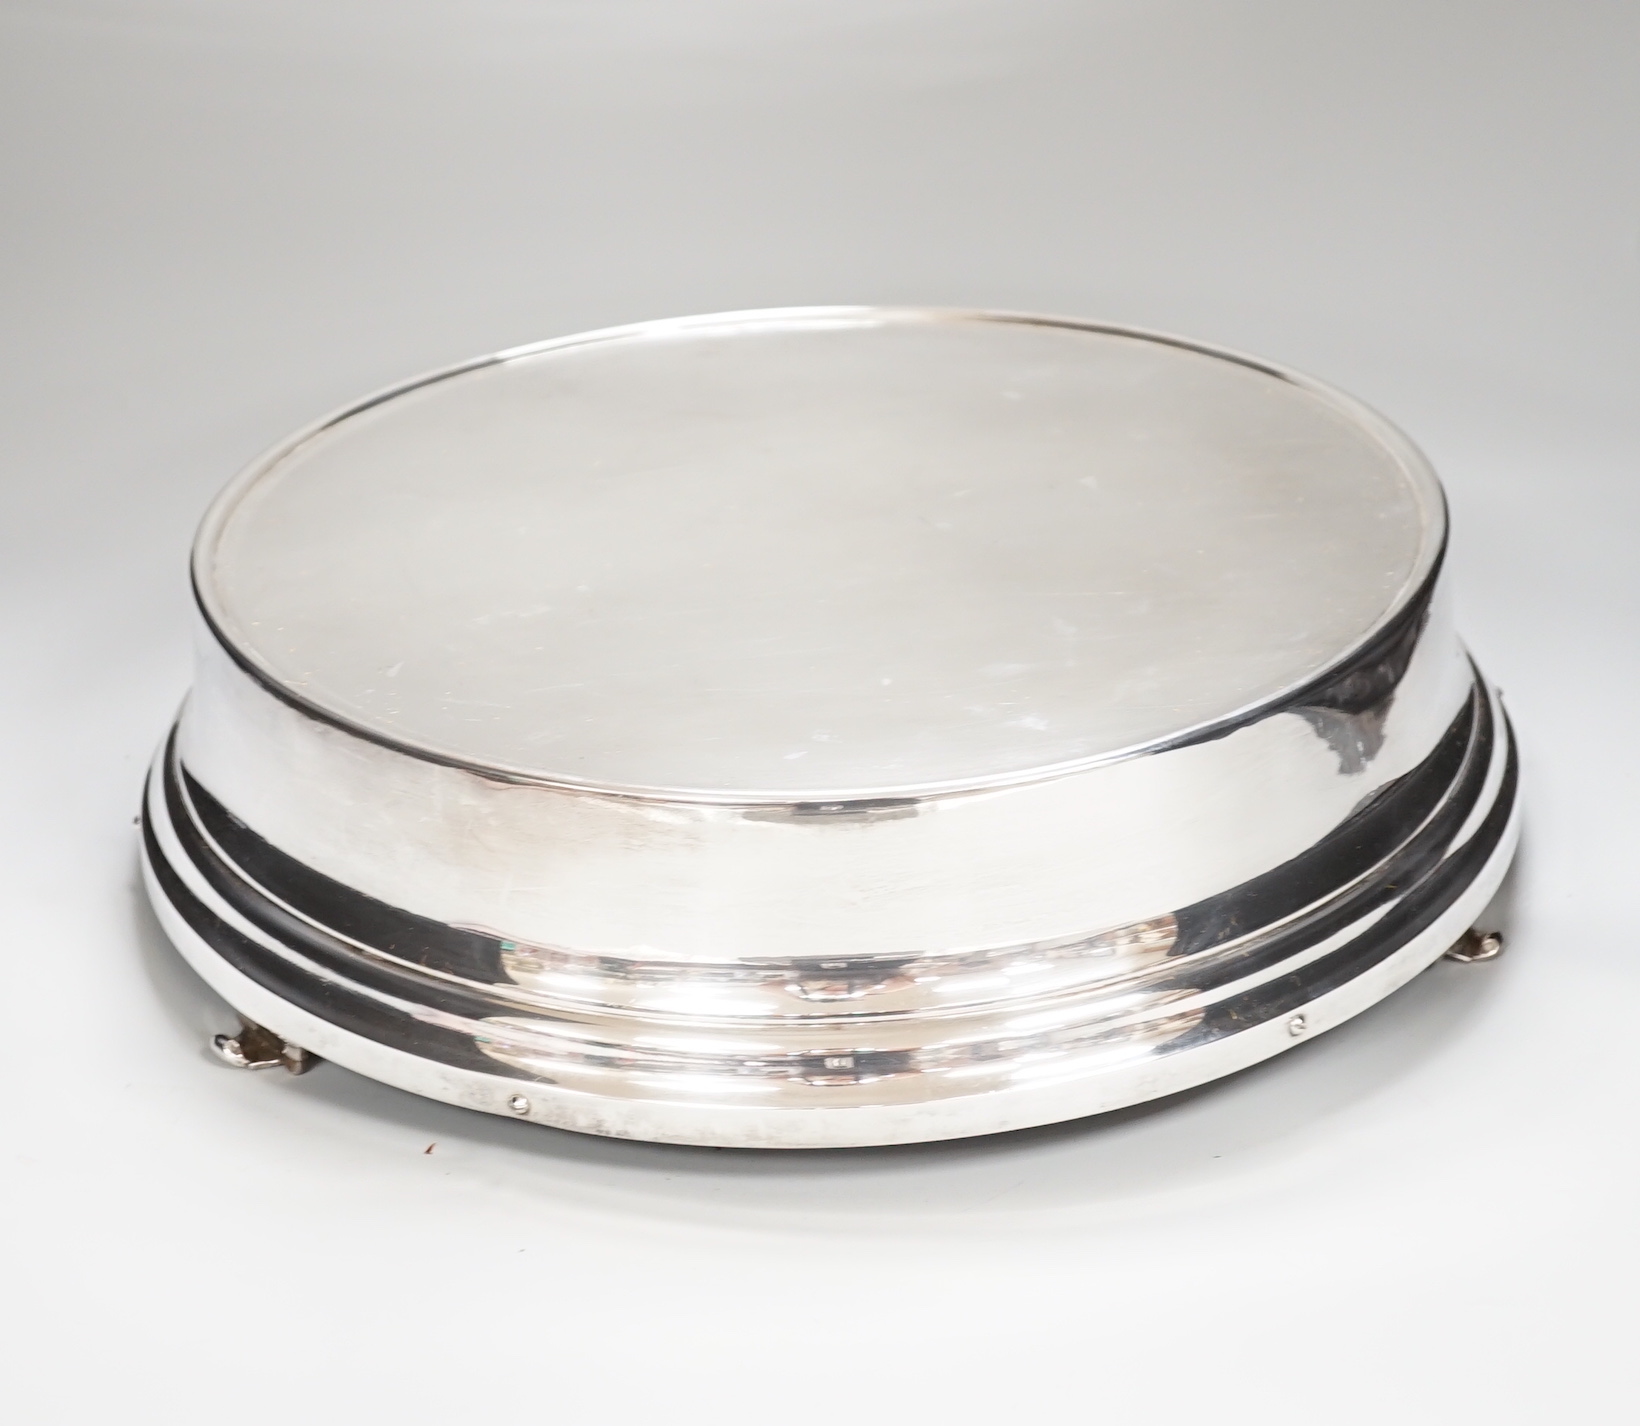 A silver plated wedding cake stand with original wooden box, 38.5 diameter